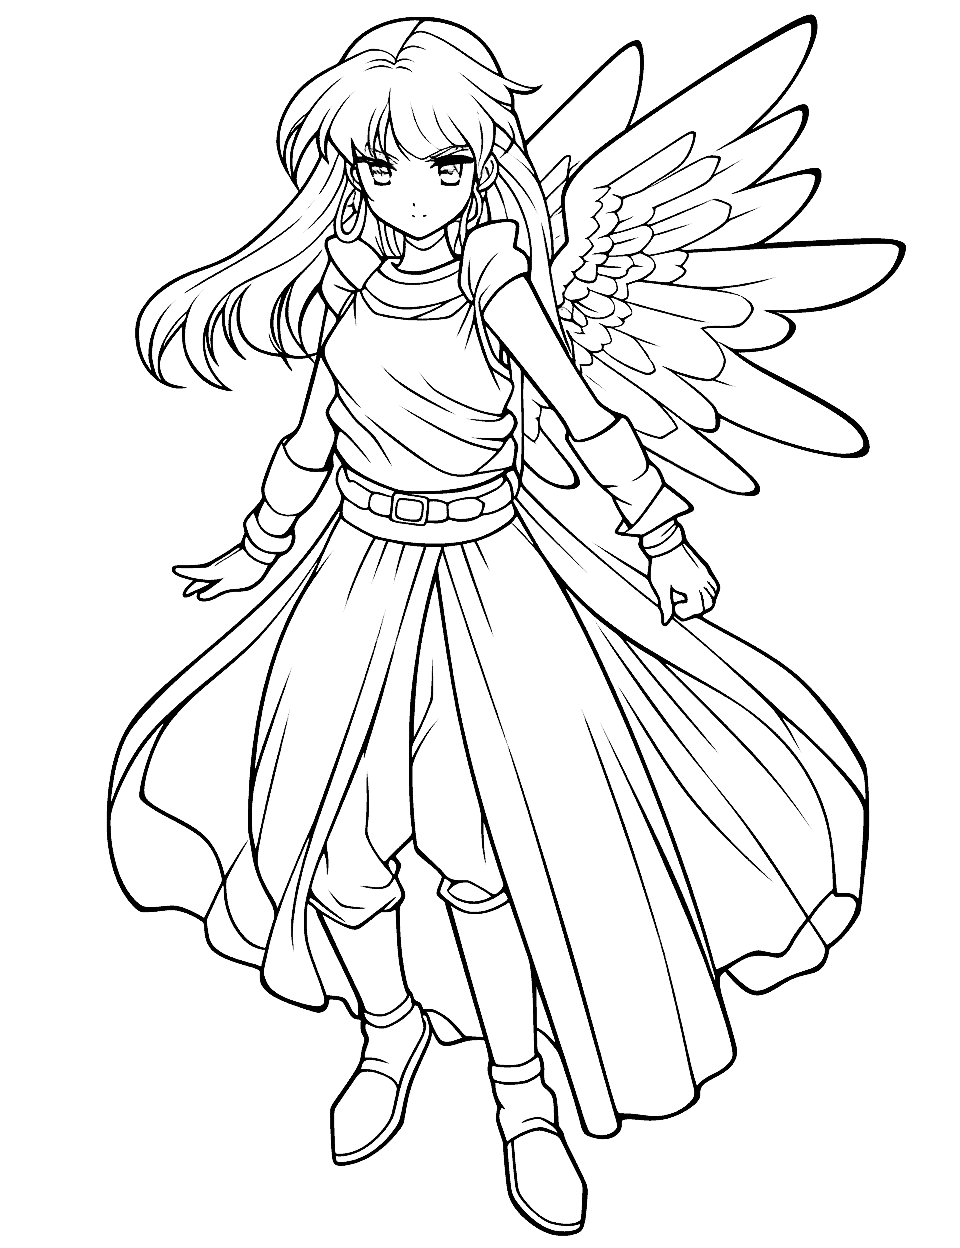 Coloring Pages | Astonishing Anime Coloring Pages For Adults Image-demhanvico.com.vn